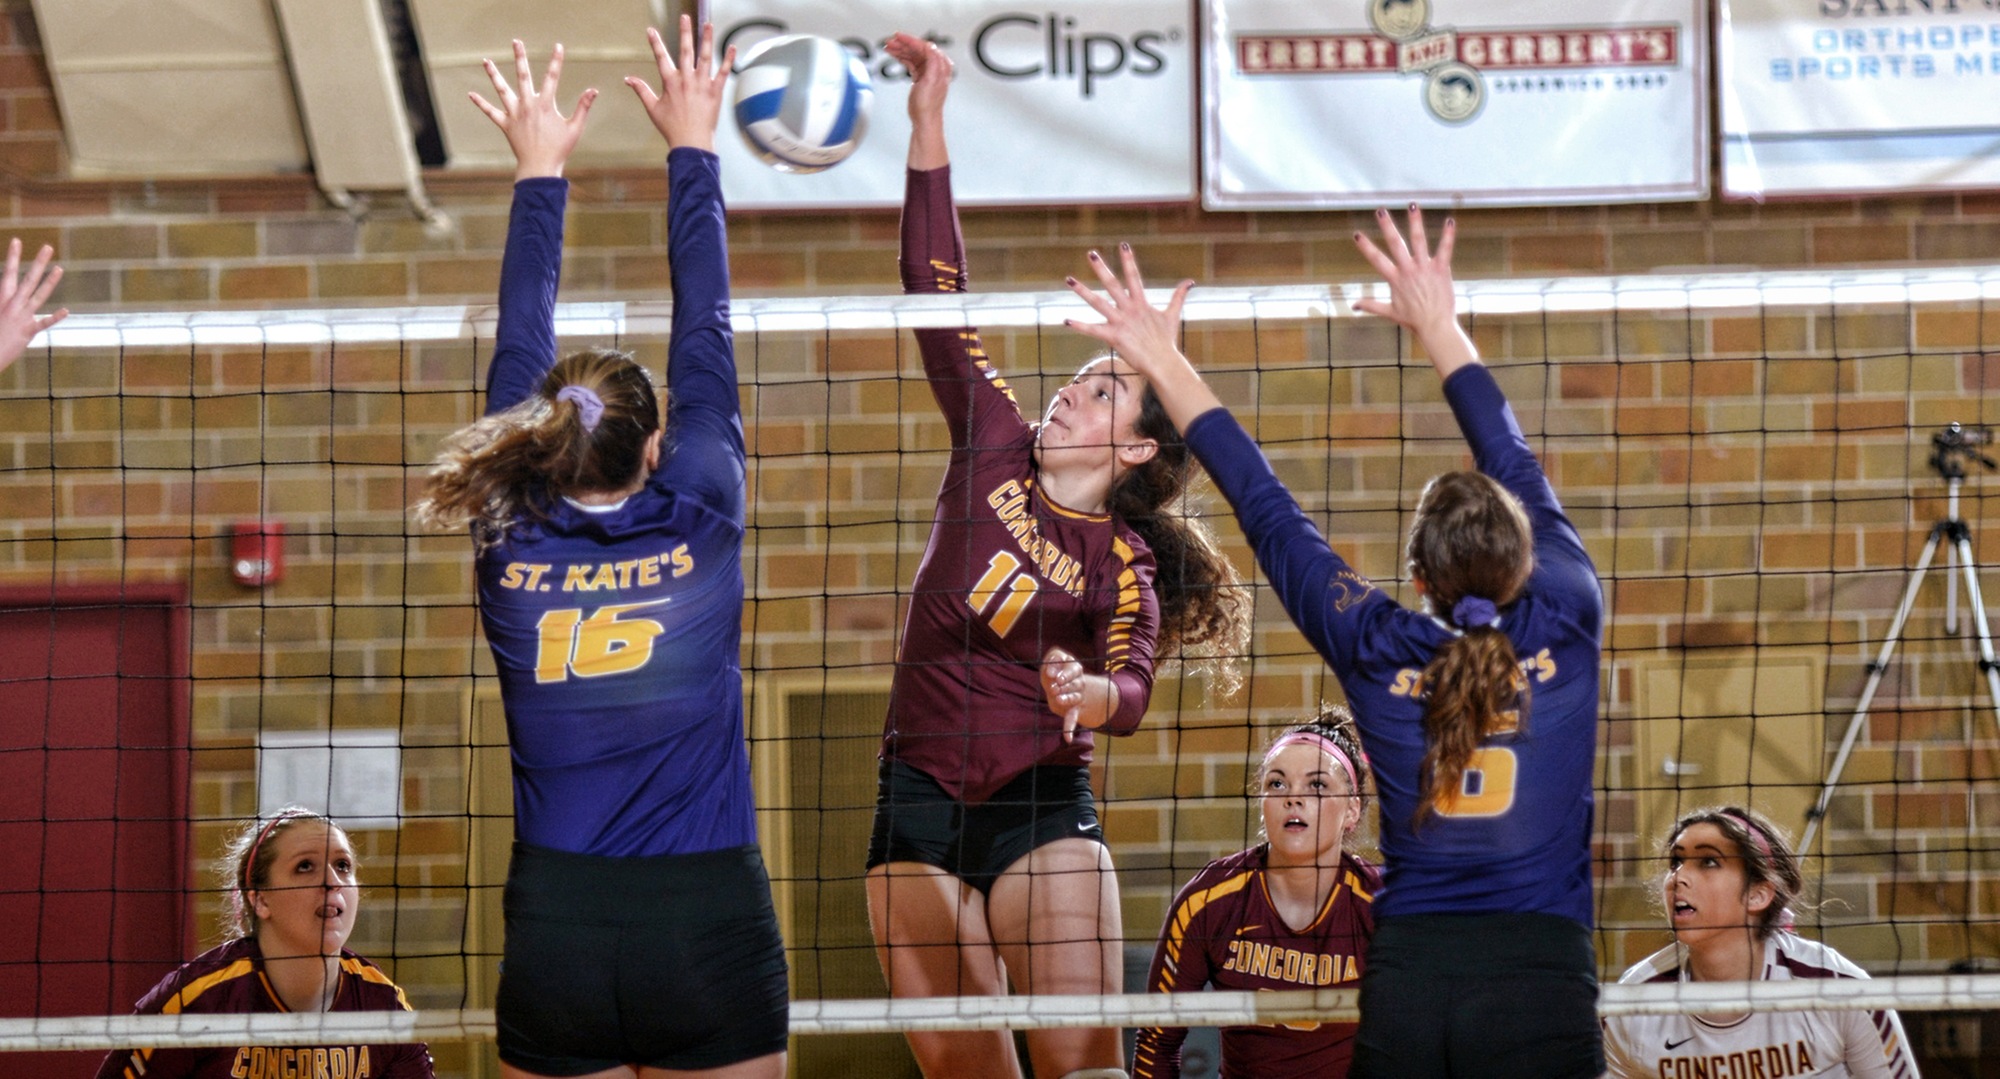 Emma Chandler puts down a winner in the Cobbers' 3-0 win over St. Catherine.